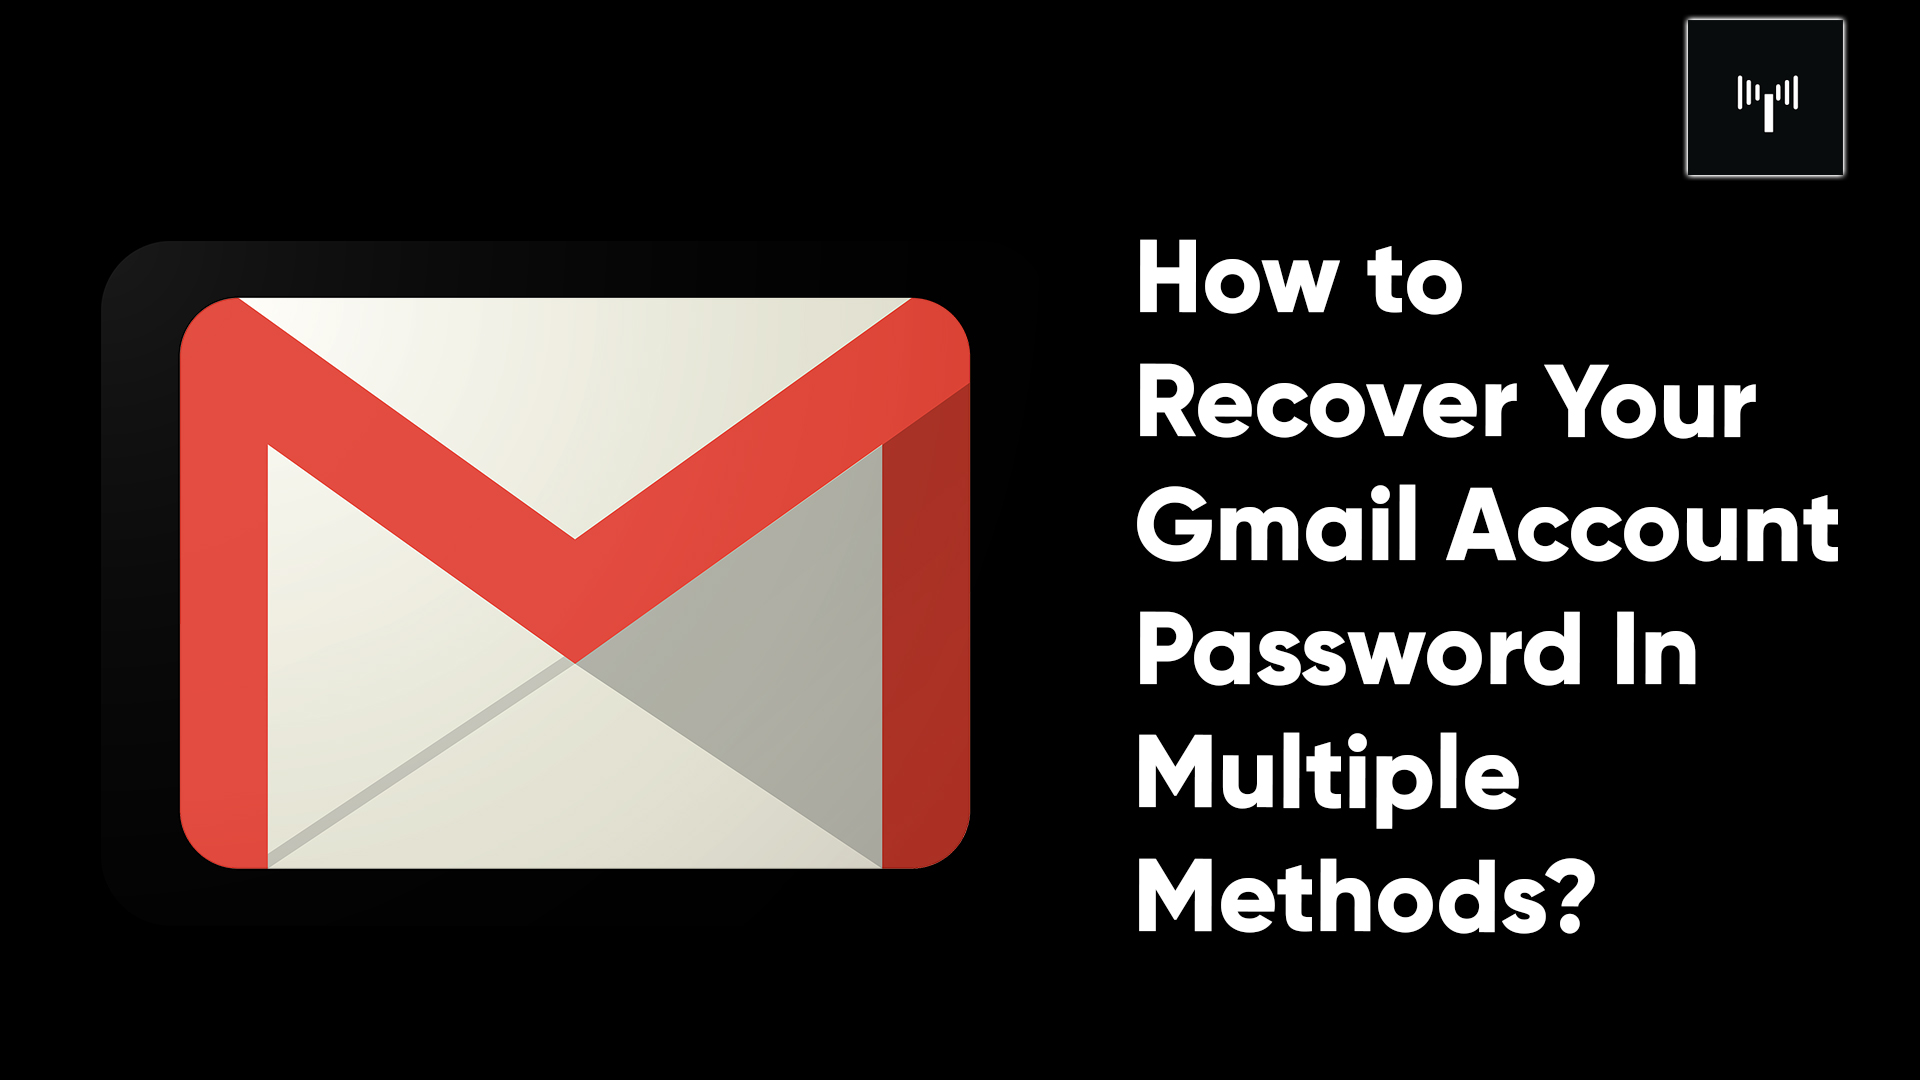 How To Recover Your Gmail Account Password In Multiple Methods